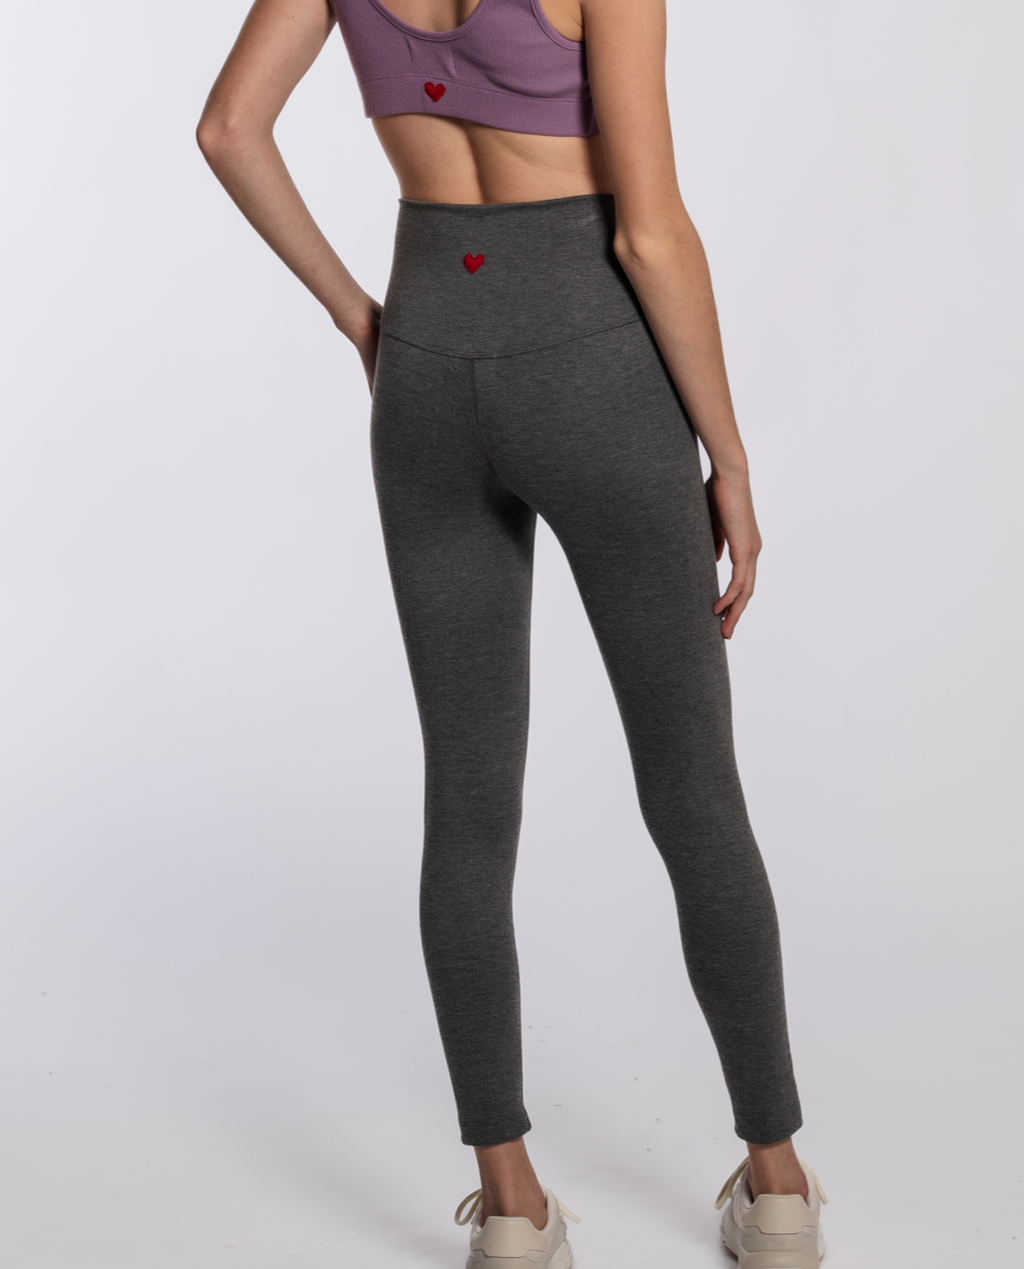 Chilled Out Leggings by Intimately at Free People in Hot Fudge, Size: XS, £34.00